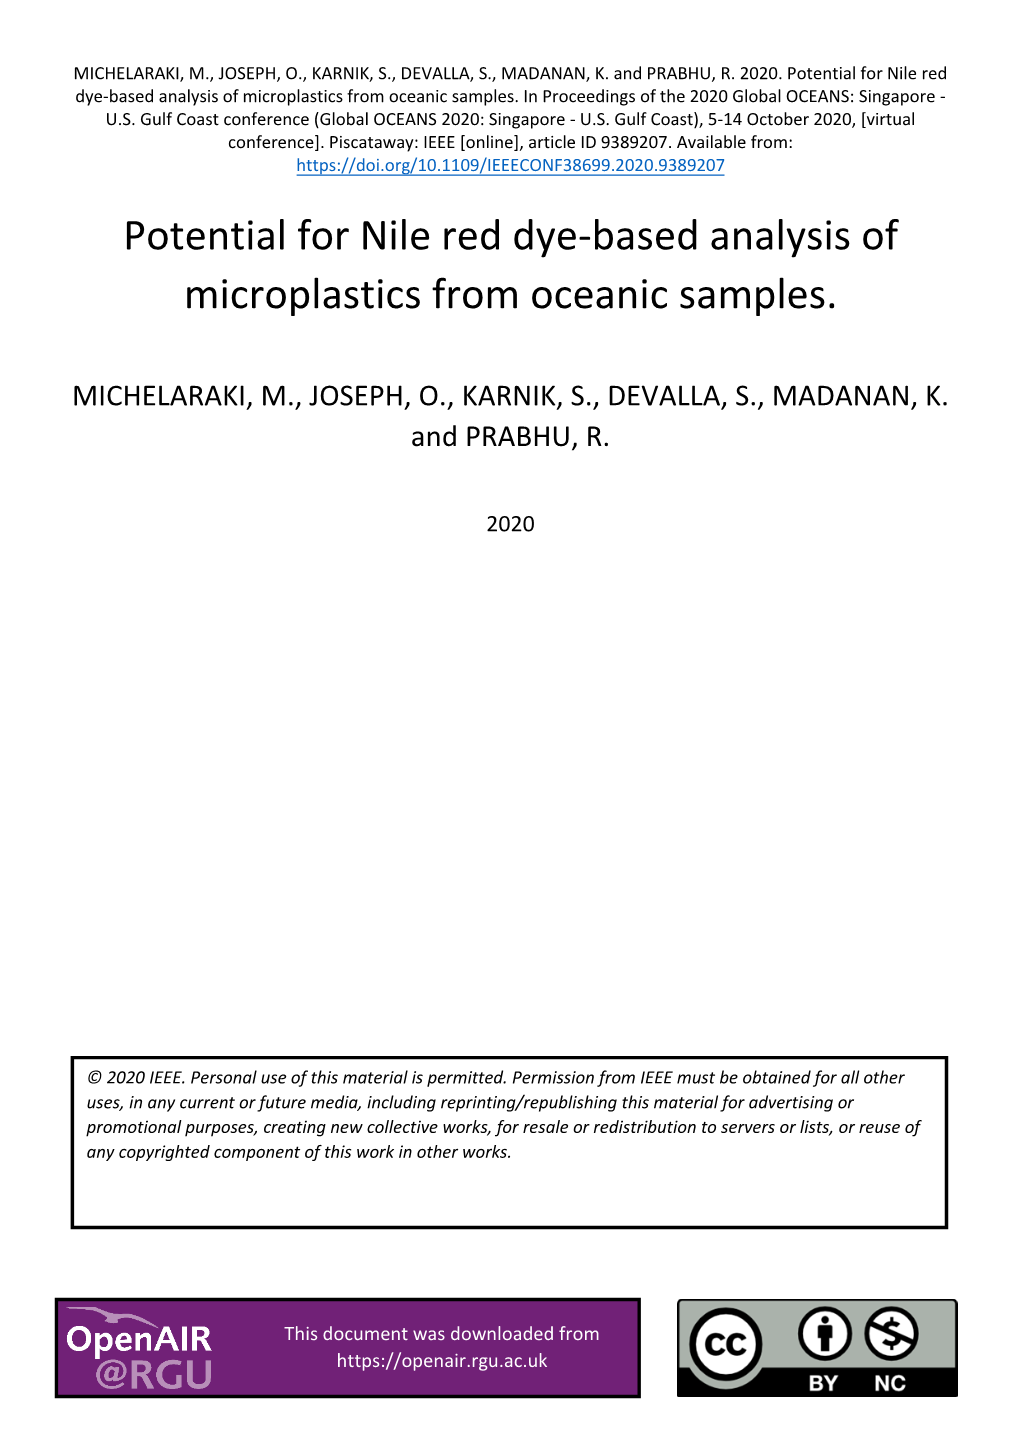 Potential for Nile Red Dye-Based Analysis of Microplastics from Oceanic Samples